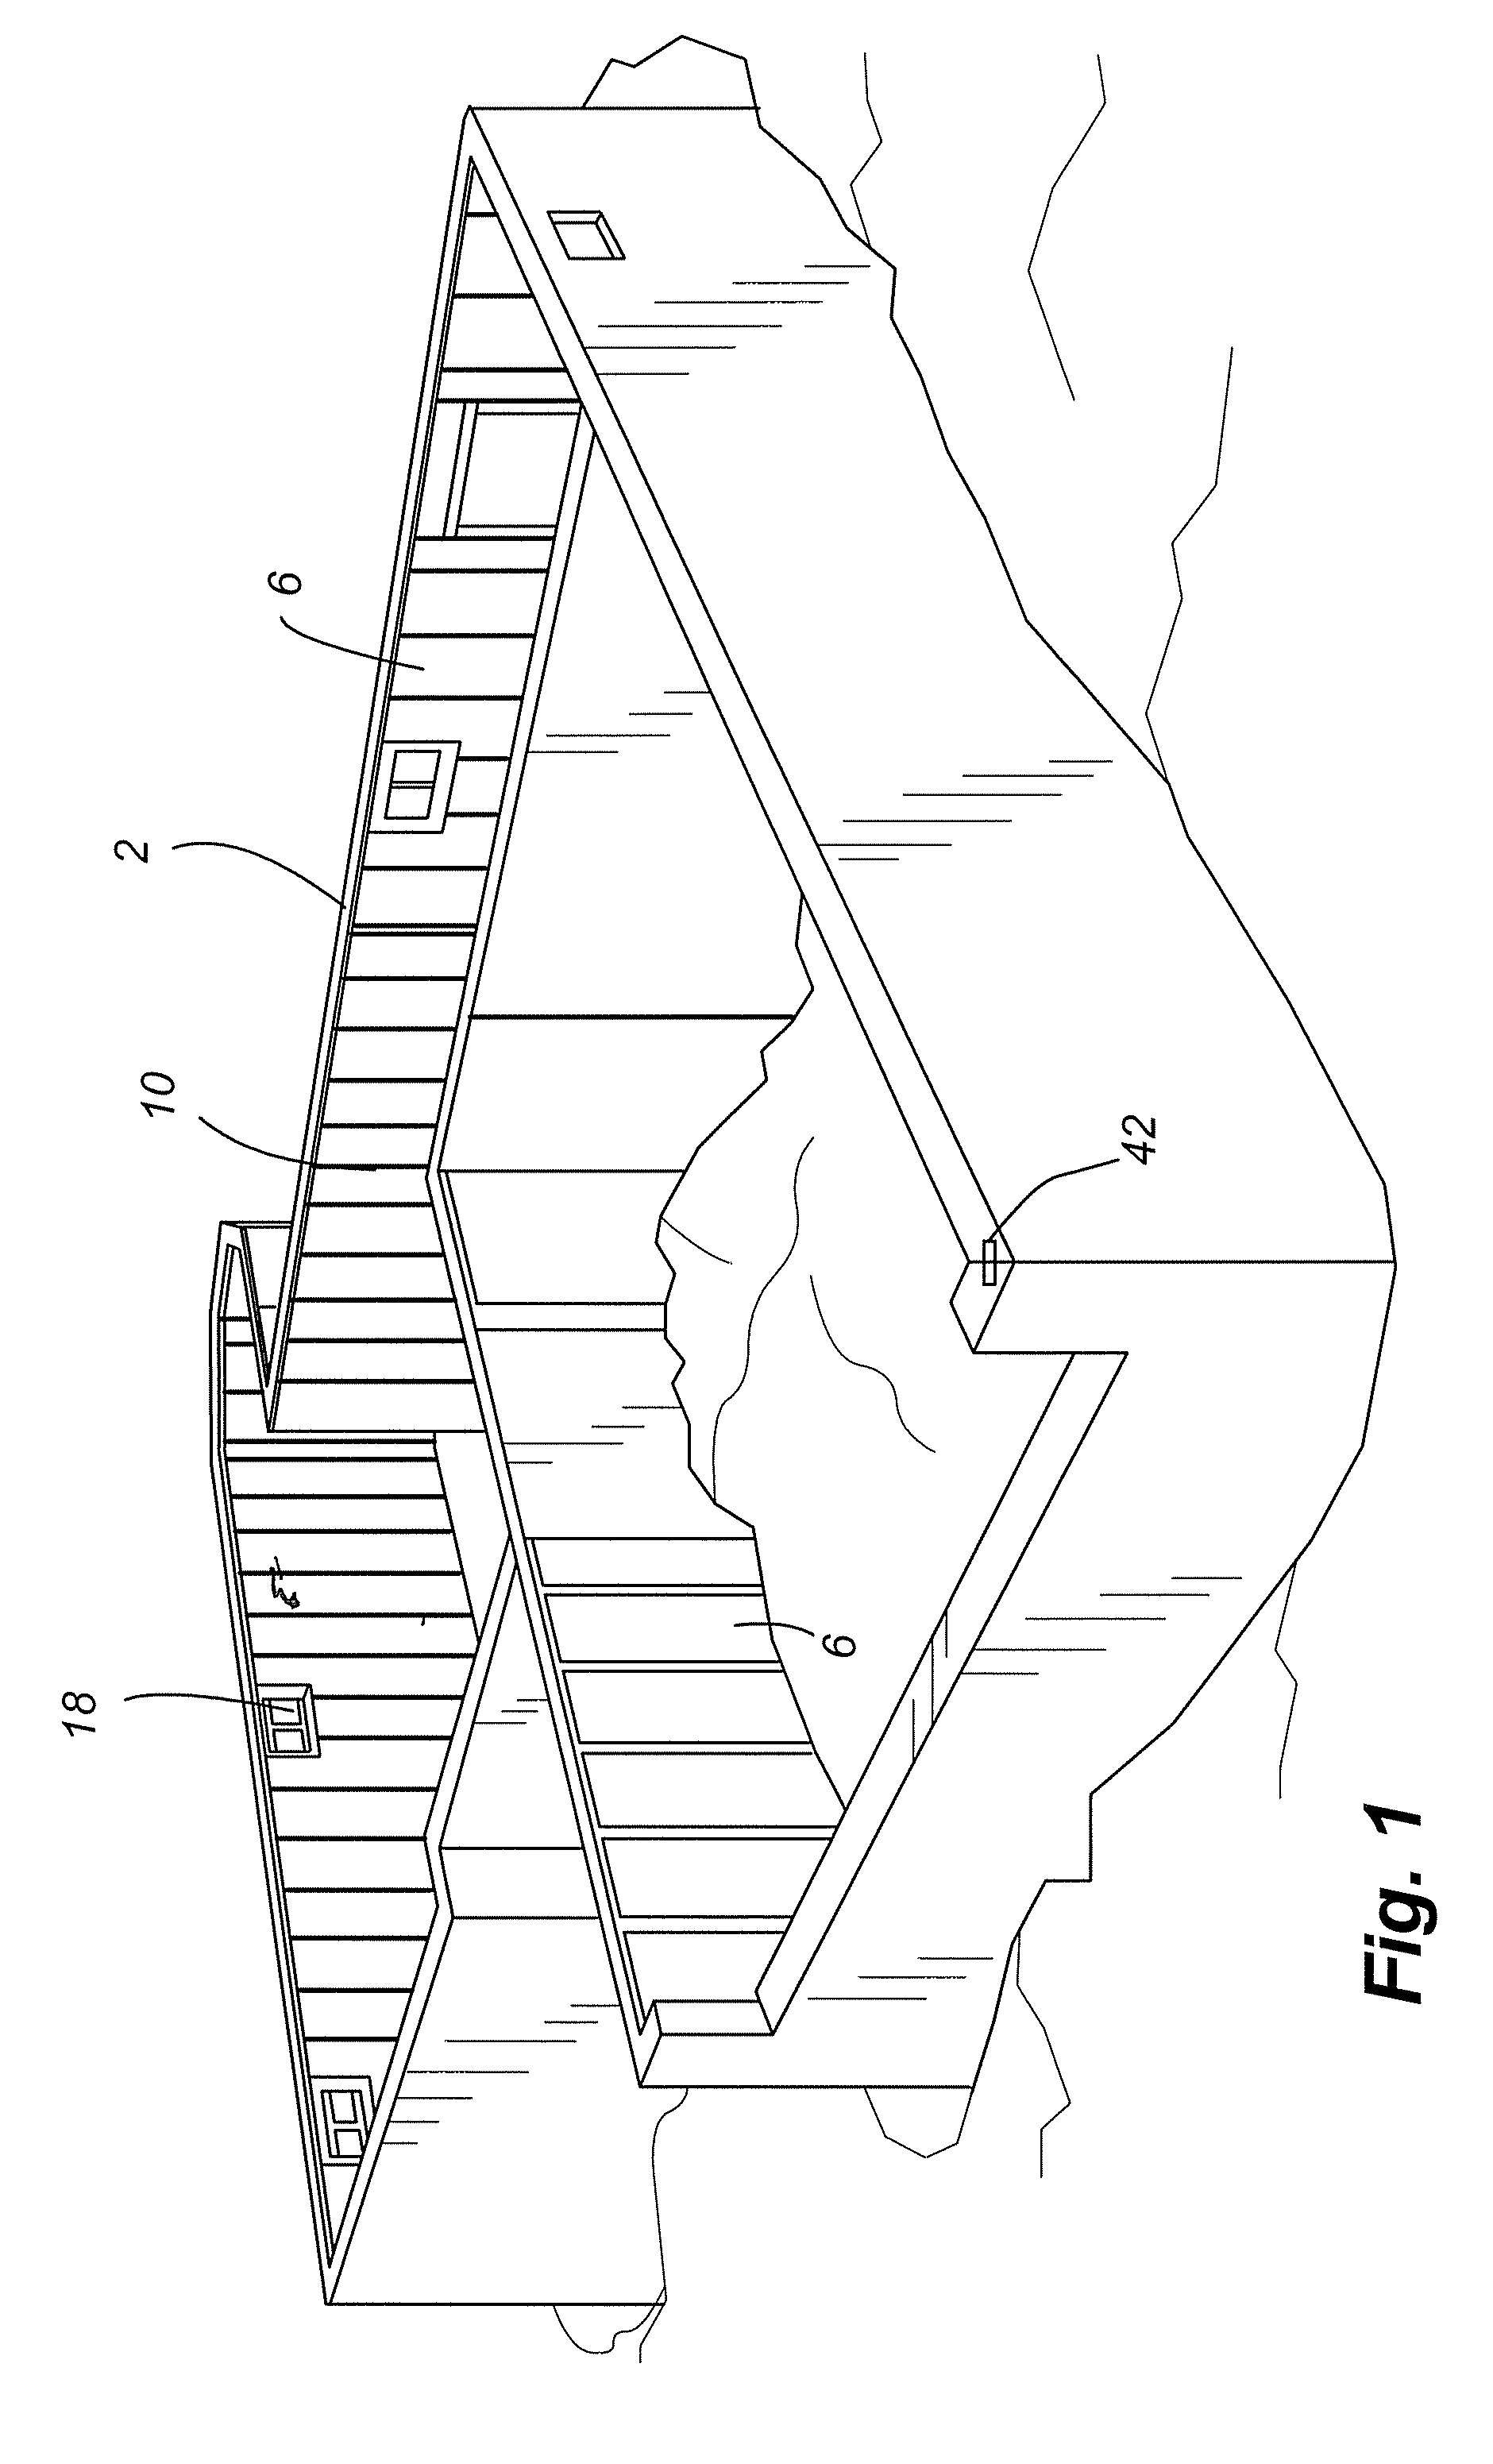 Method and apparatus for fabricating a low density wall panel with interior surface finished